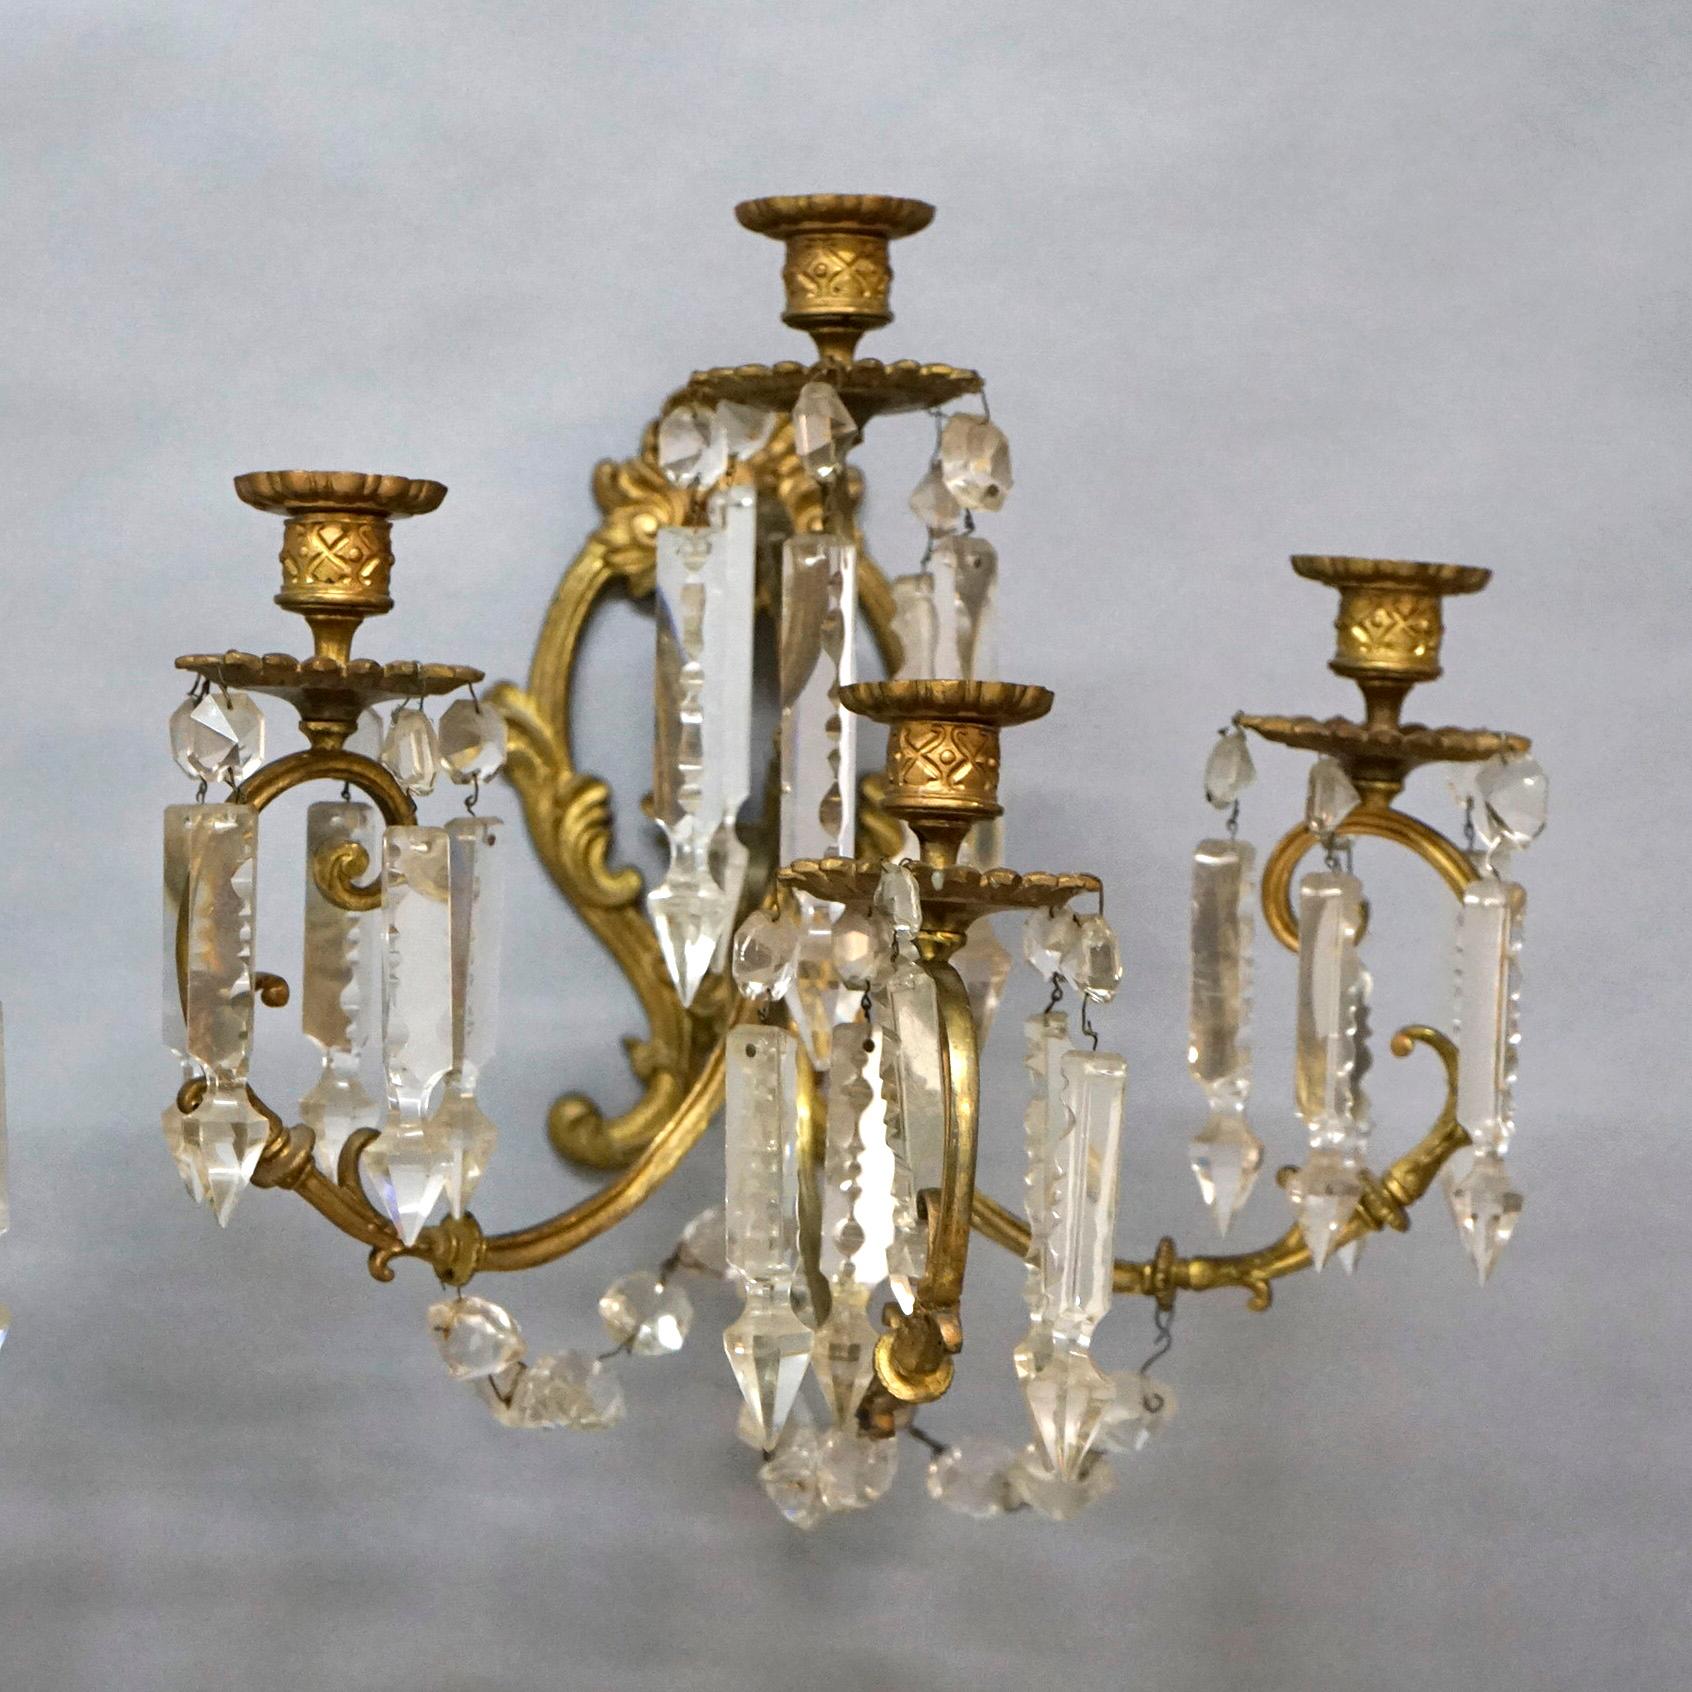 Antique Classical French Gilt Bronze & Cut Crystal Four-Arm Candle Sconces 19thC 1